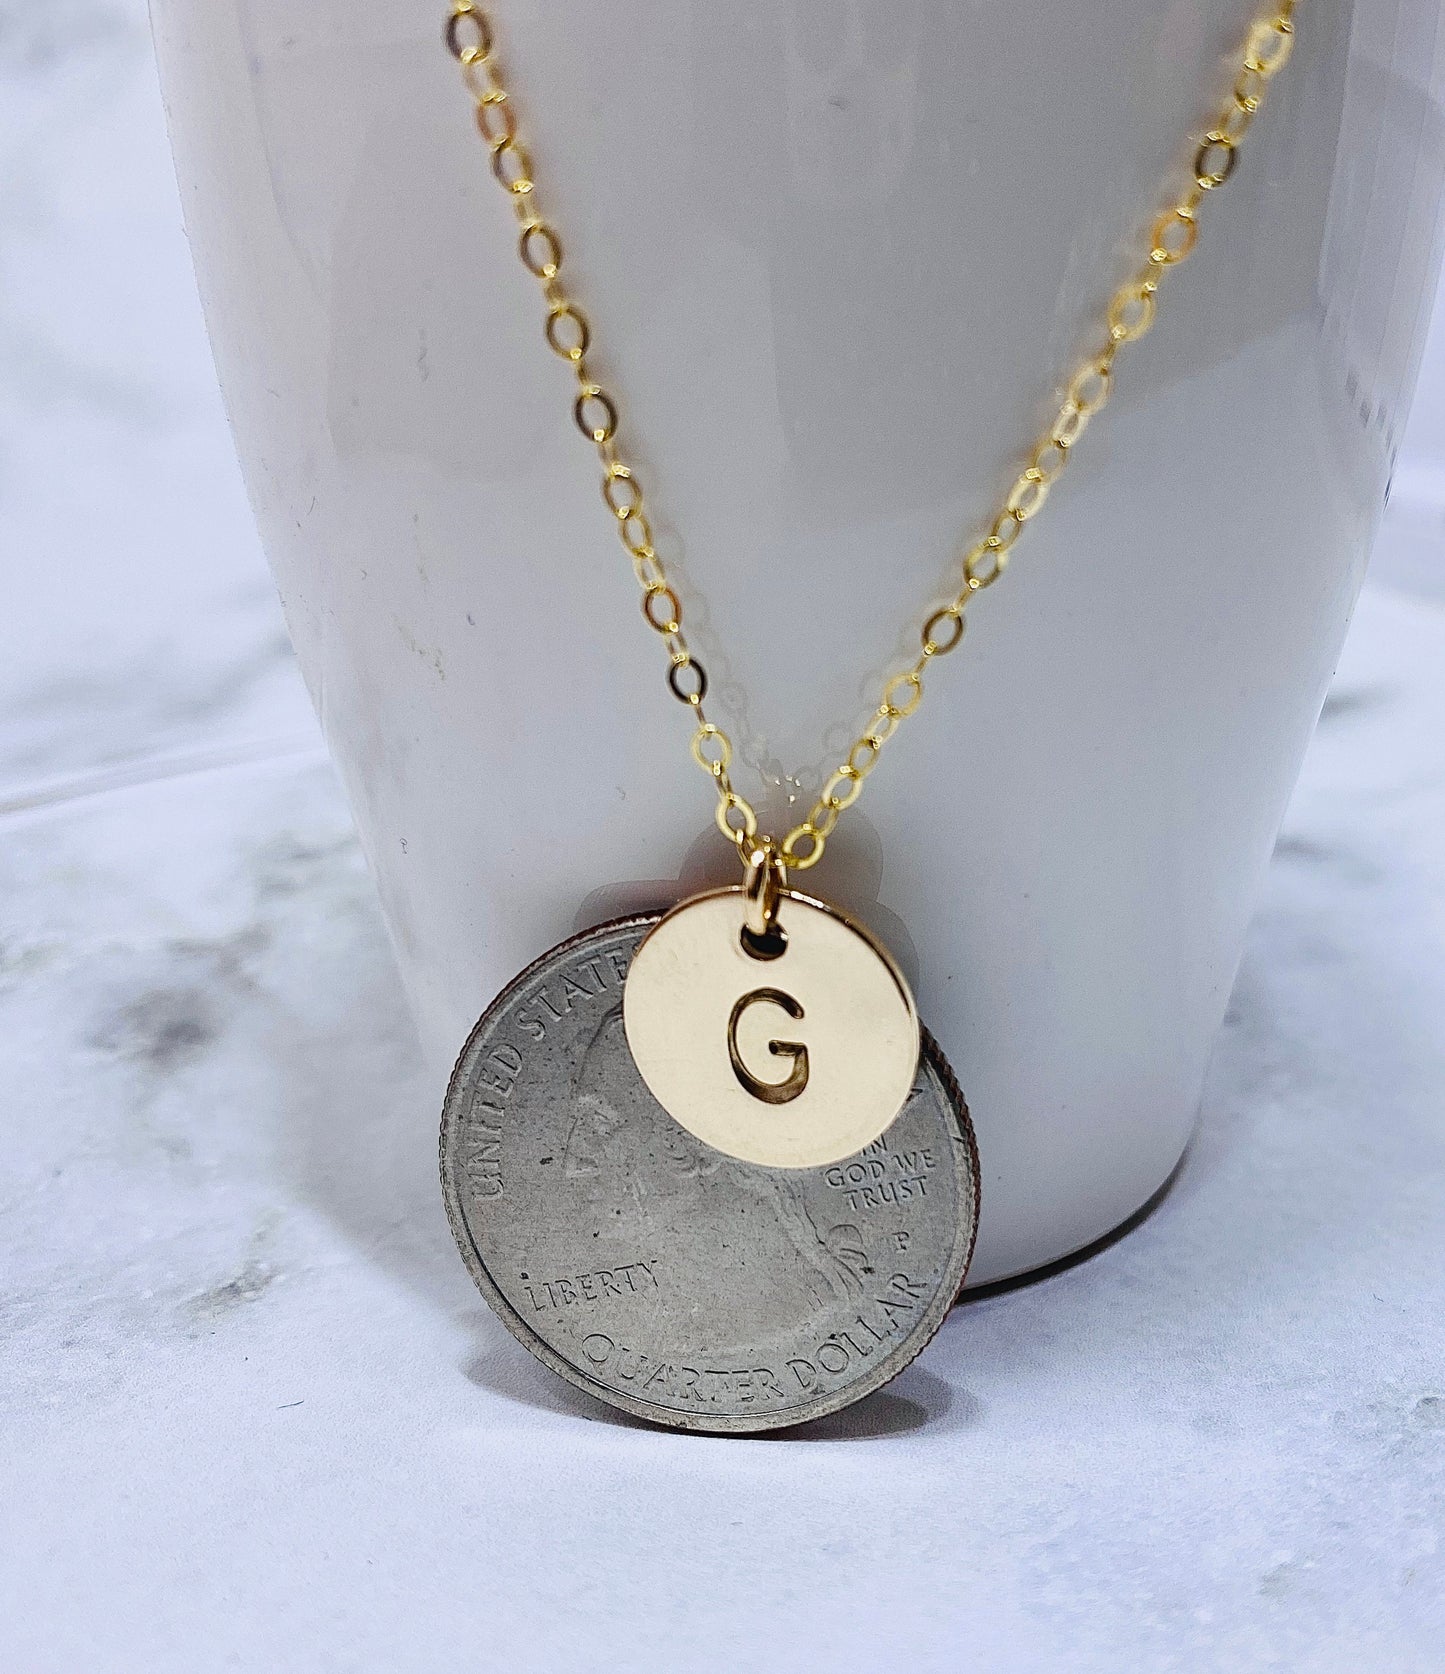 Custom Gold Fill Initial Necklace